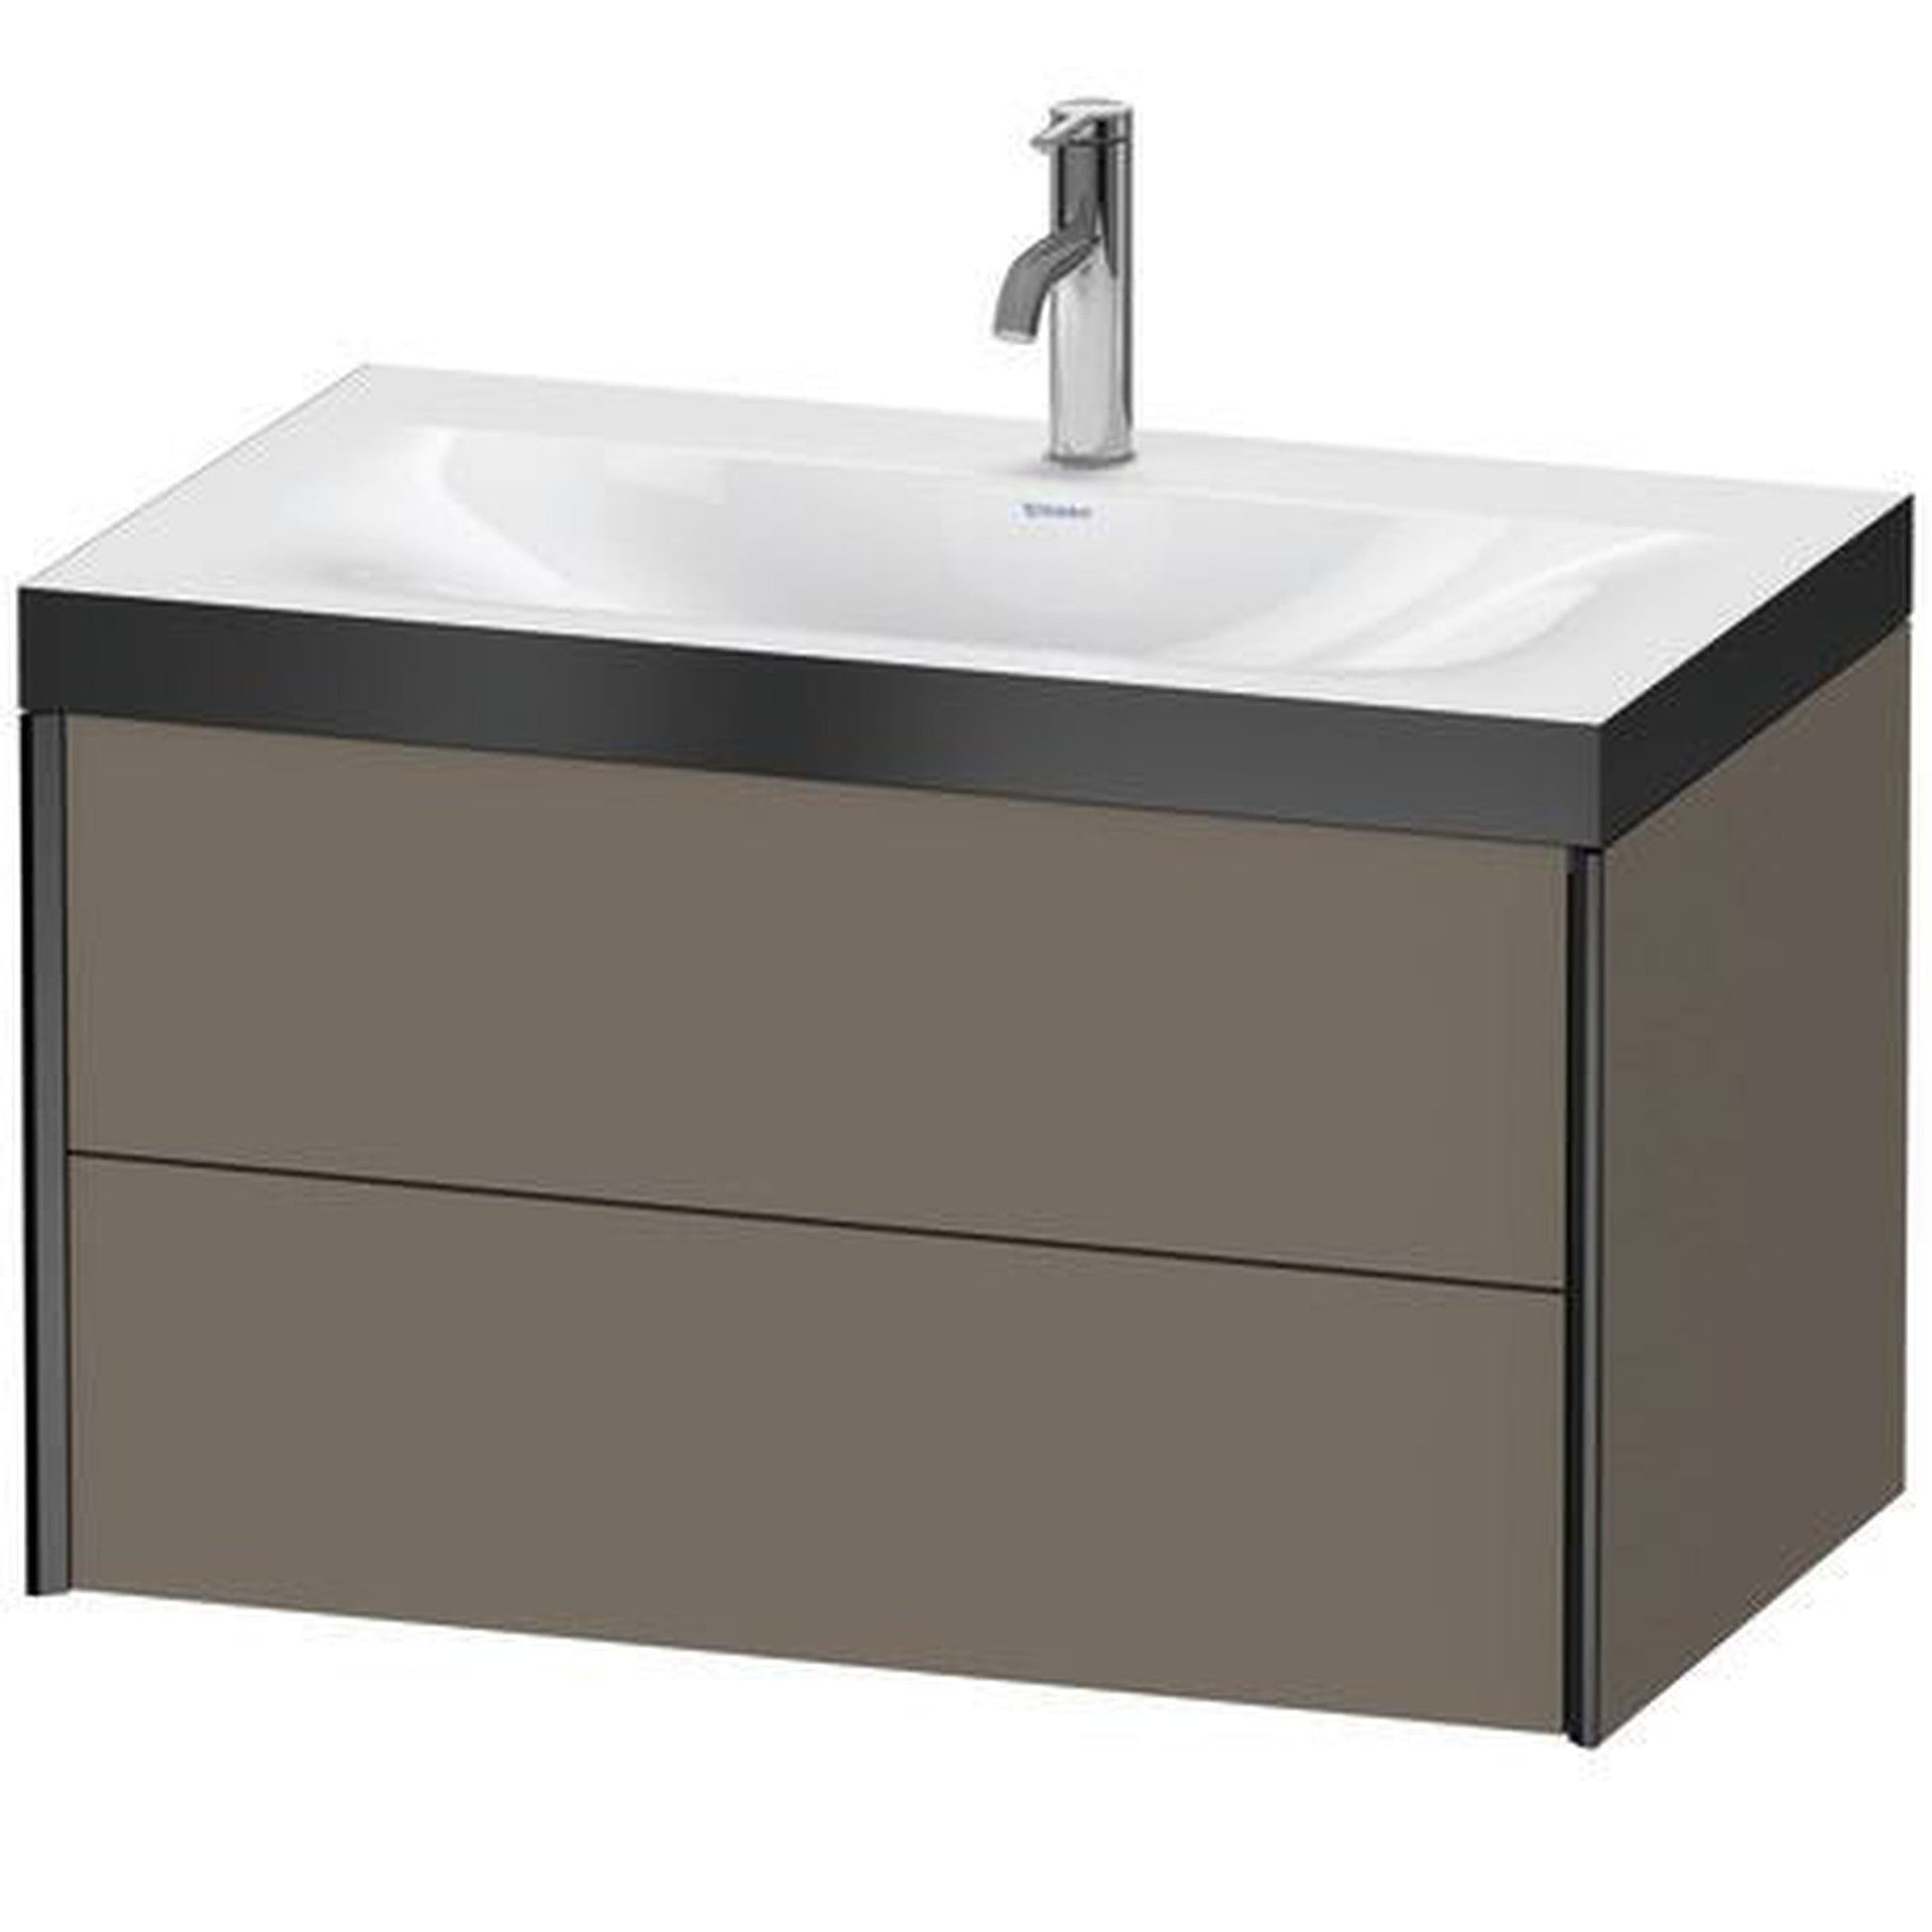 Duravit Xviu 31" x 20" x 19" Two Drawer C-Bonded Wall-Mount Vanity Kit With One Tap Hole, Flannel Gray (XV4615OB290P)